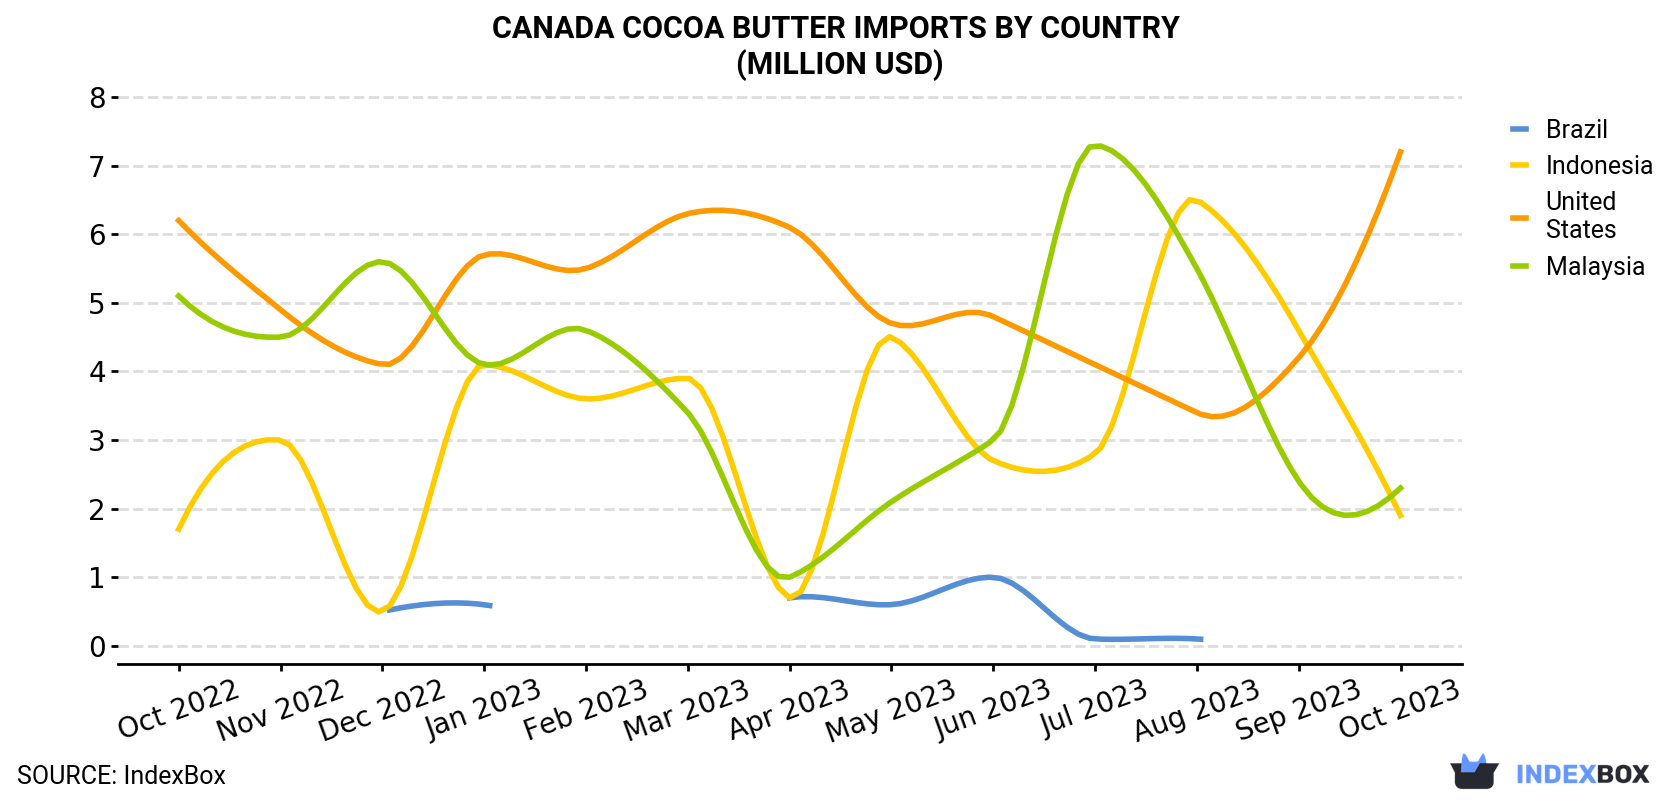 Canada Cocoa Butter Imports By Country (Million USD)